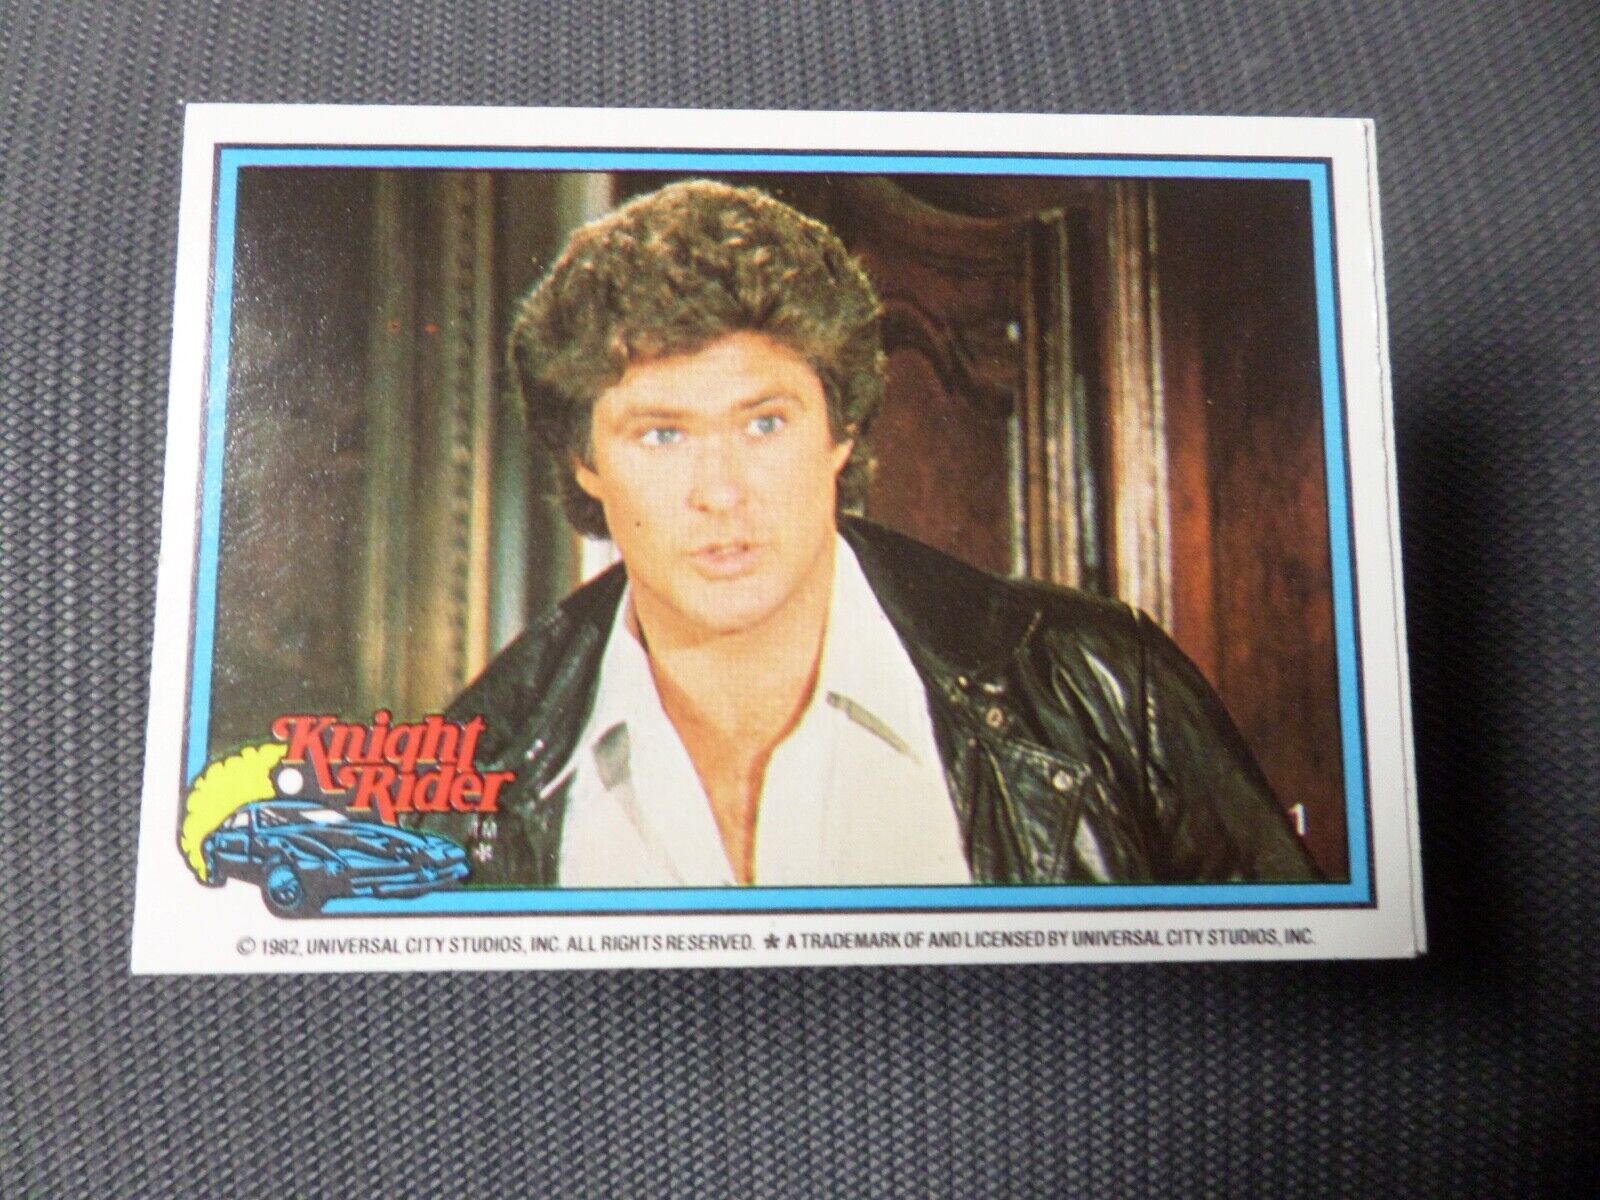 Knight Rider TV Show Donruss Trading Cards PICK/CHOICE Complete your set